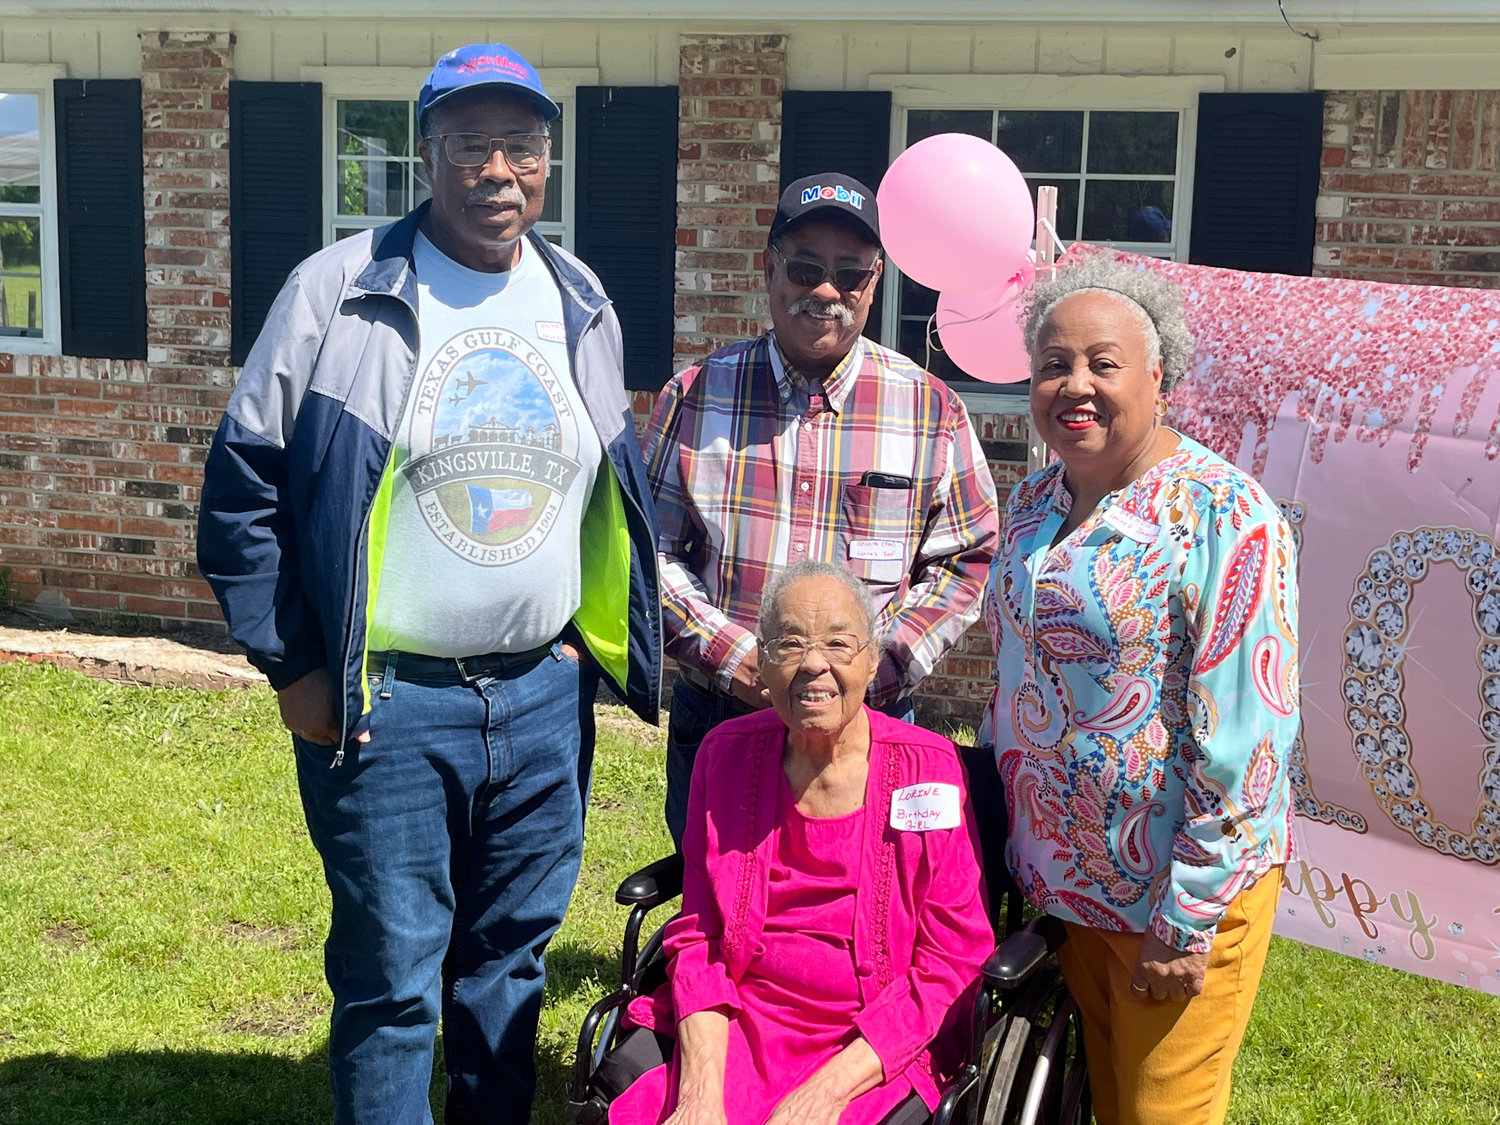 Lorine Hunter, seated, celebrated her 100th birthday with family and friends at her home north of Quitman, including her children, from left, Walter Hunter, Kennith Hunter and Brenda Hunter.